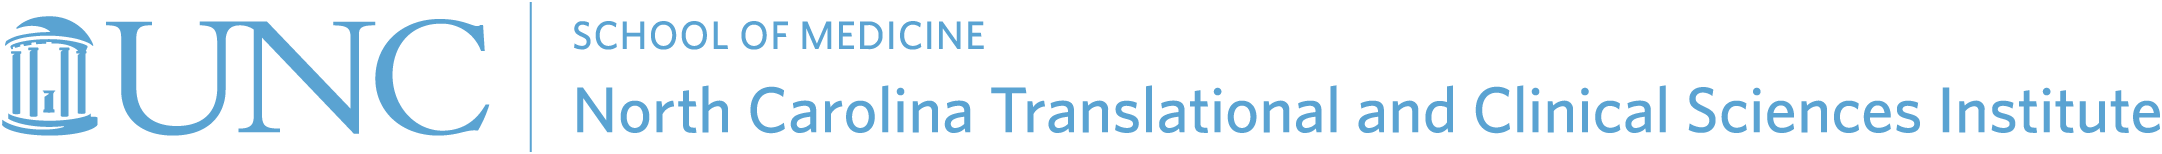 NC Translational and Clinical Sciences Institute logo